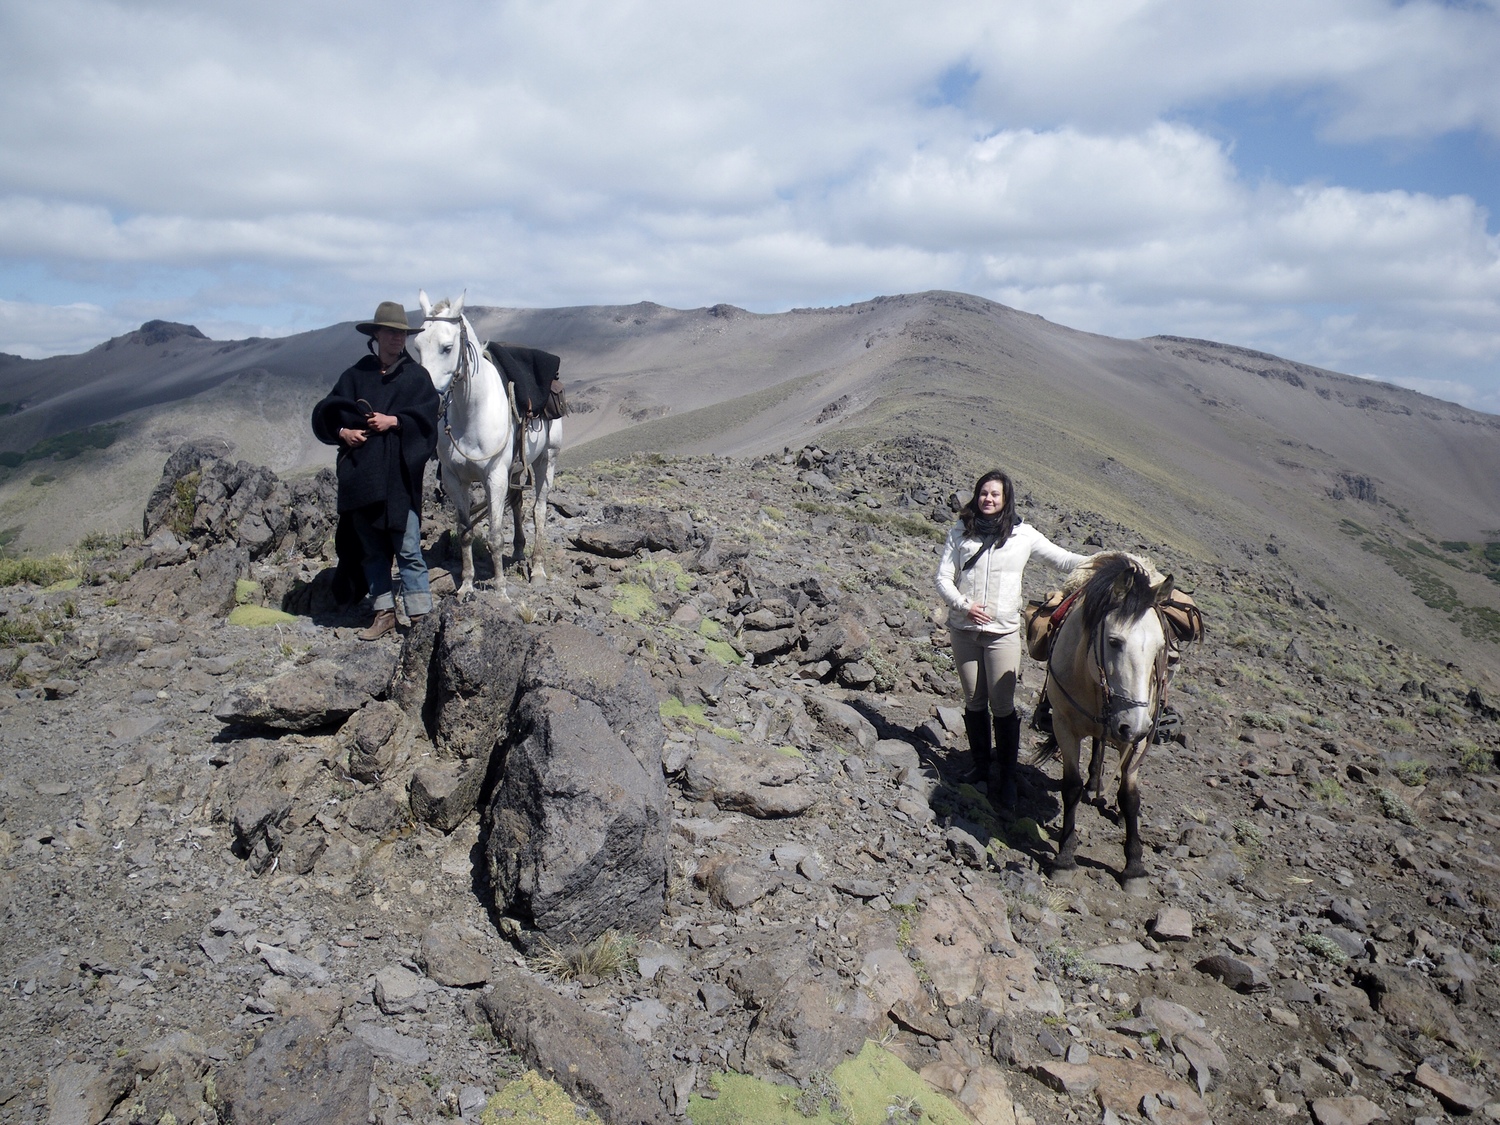 Horseback on a high pass in the Andes